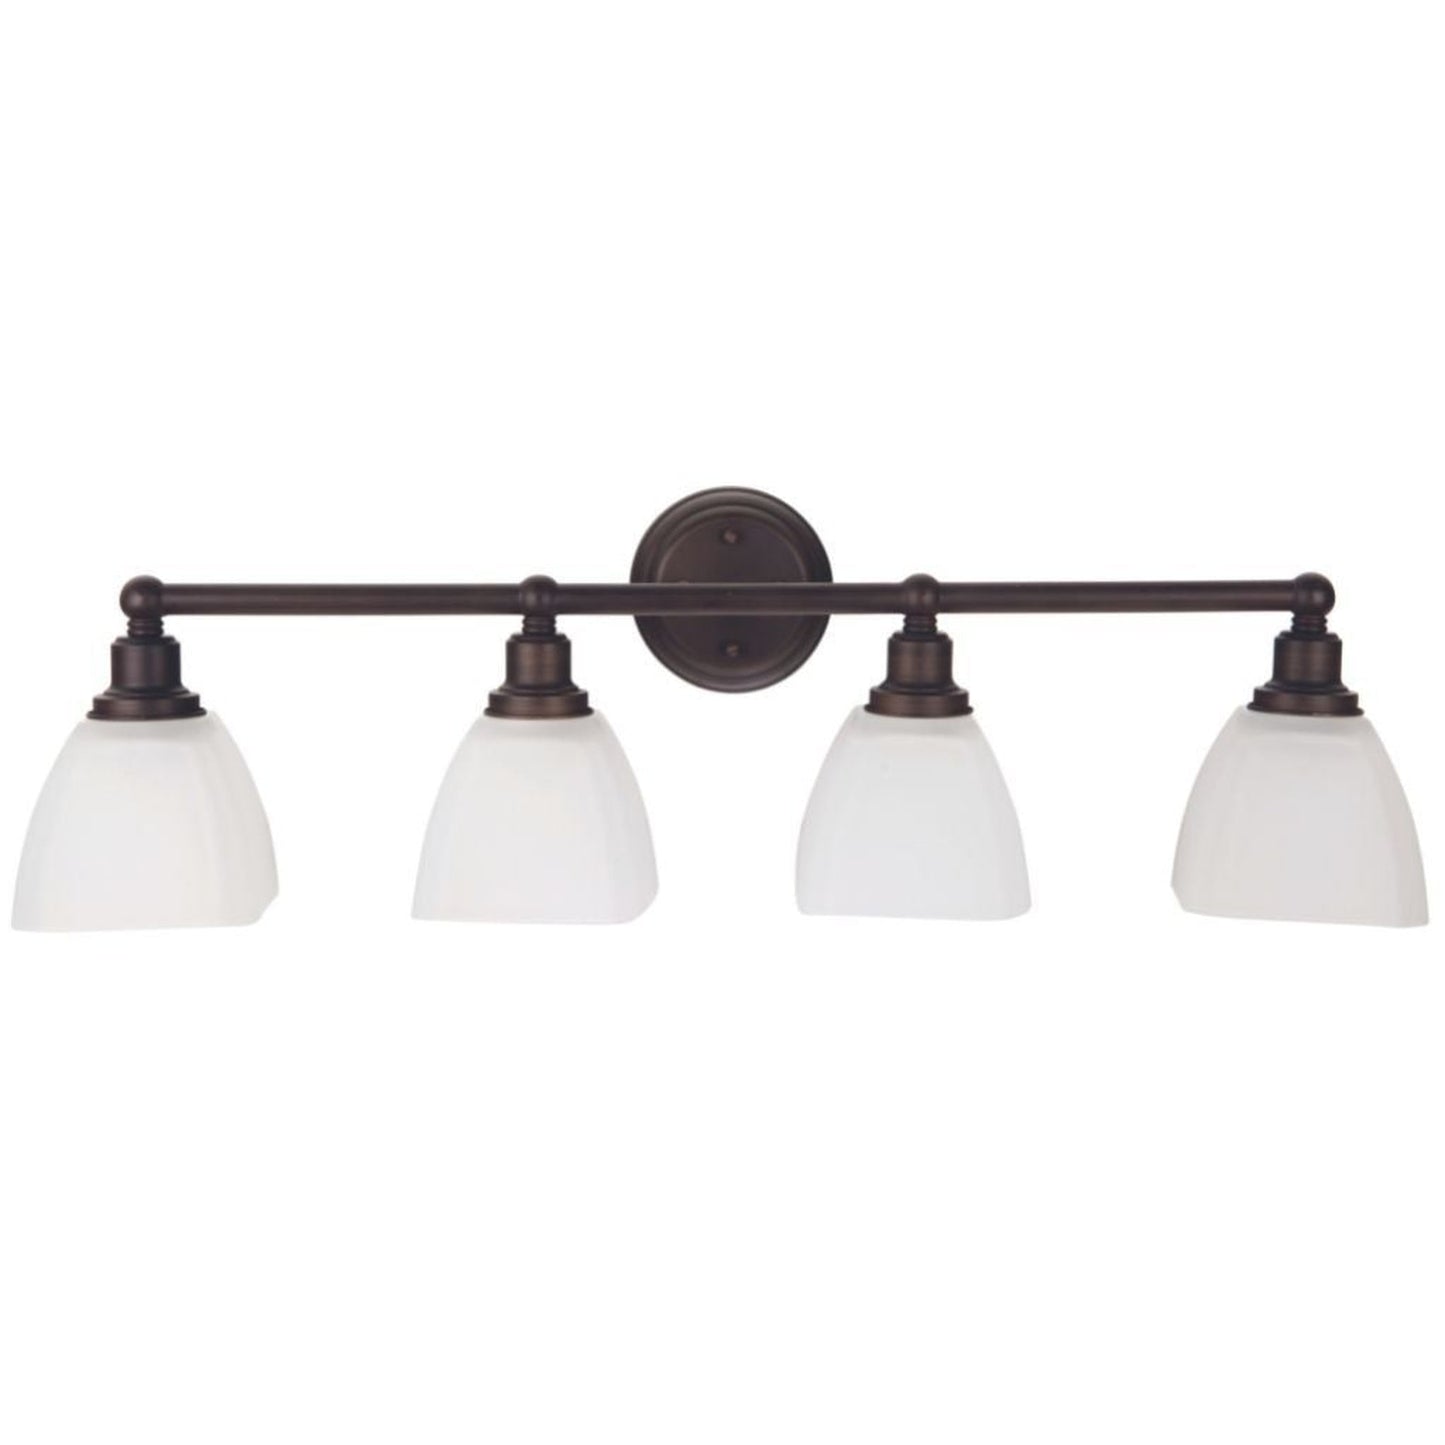 Craftmade Bradley 33" 4-Light Bronze Vanity Light With White Frosted Glass Shades